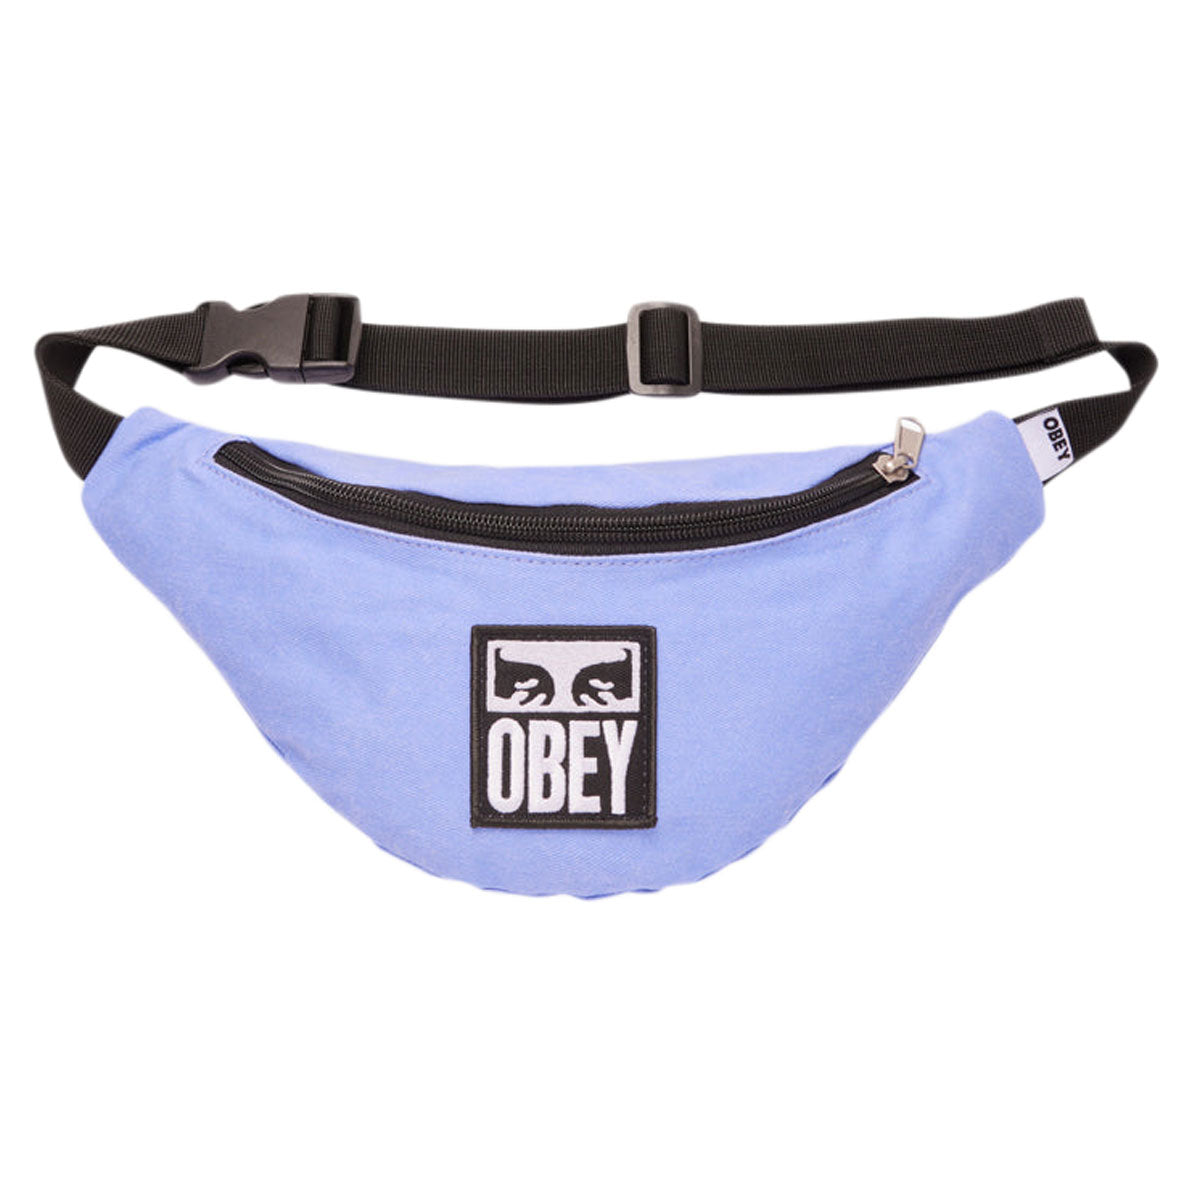 Obey Wasted Hip II Bag - Pigment Hydrangea image 1